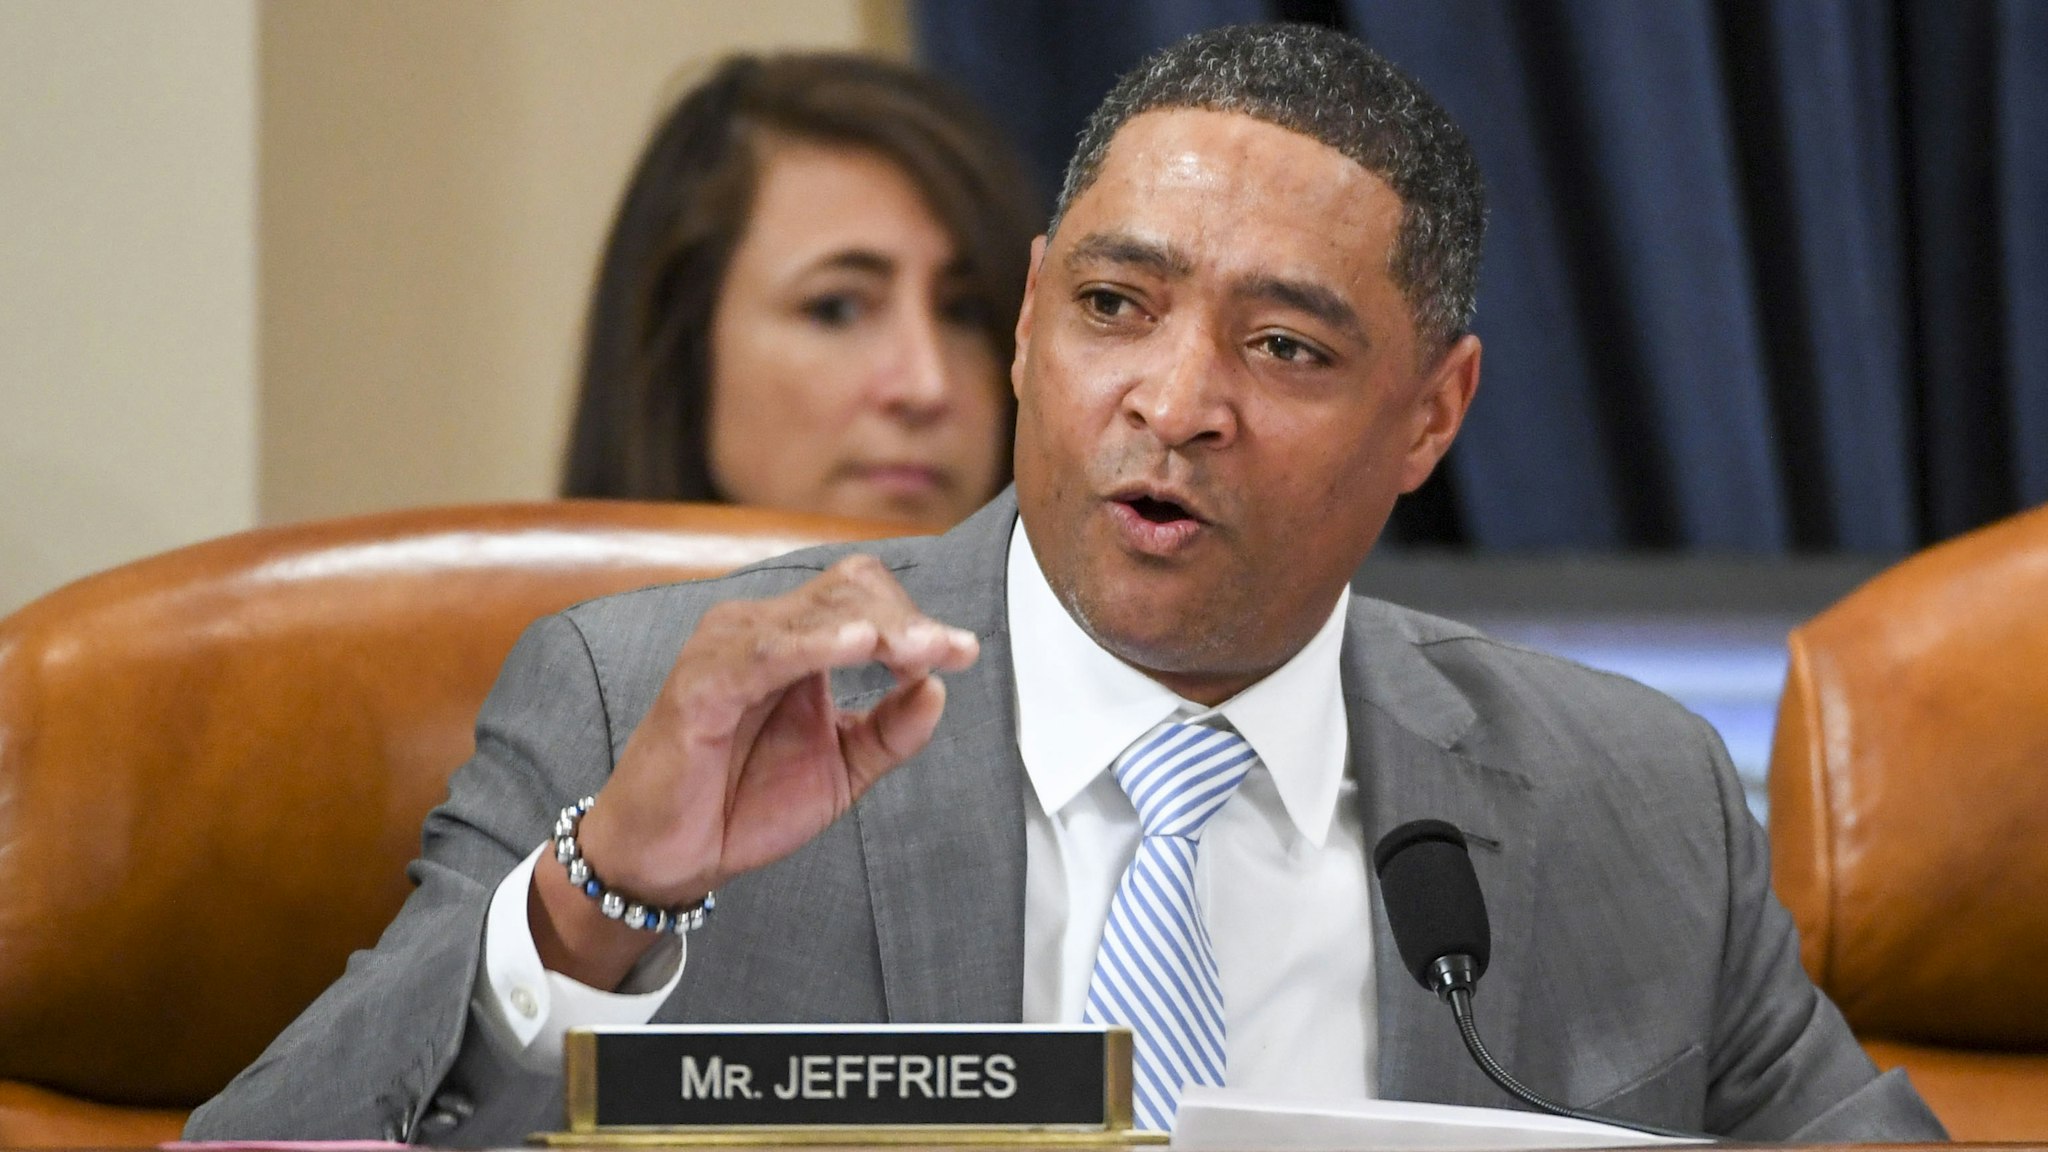 Representative Cedric Richmond, a Democrat from Louisiana, during a House Judiciary Committee hearing in Washington, D.C., U.S., on Thursday, Dec. 12, 2019. The Judiciary Committee is set to finish debating articles of impeachment against President Donald Trump today with a likely party-line vote to send the resolution to the floor of the House.